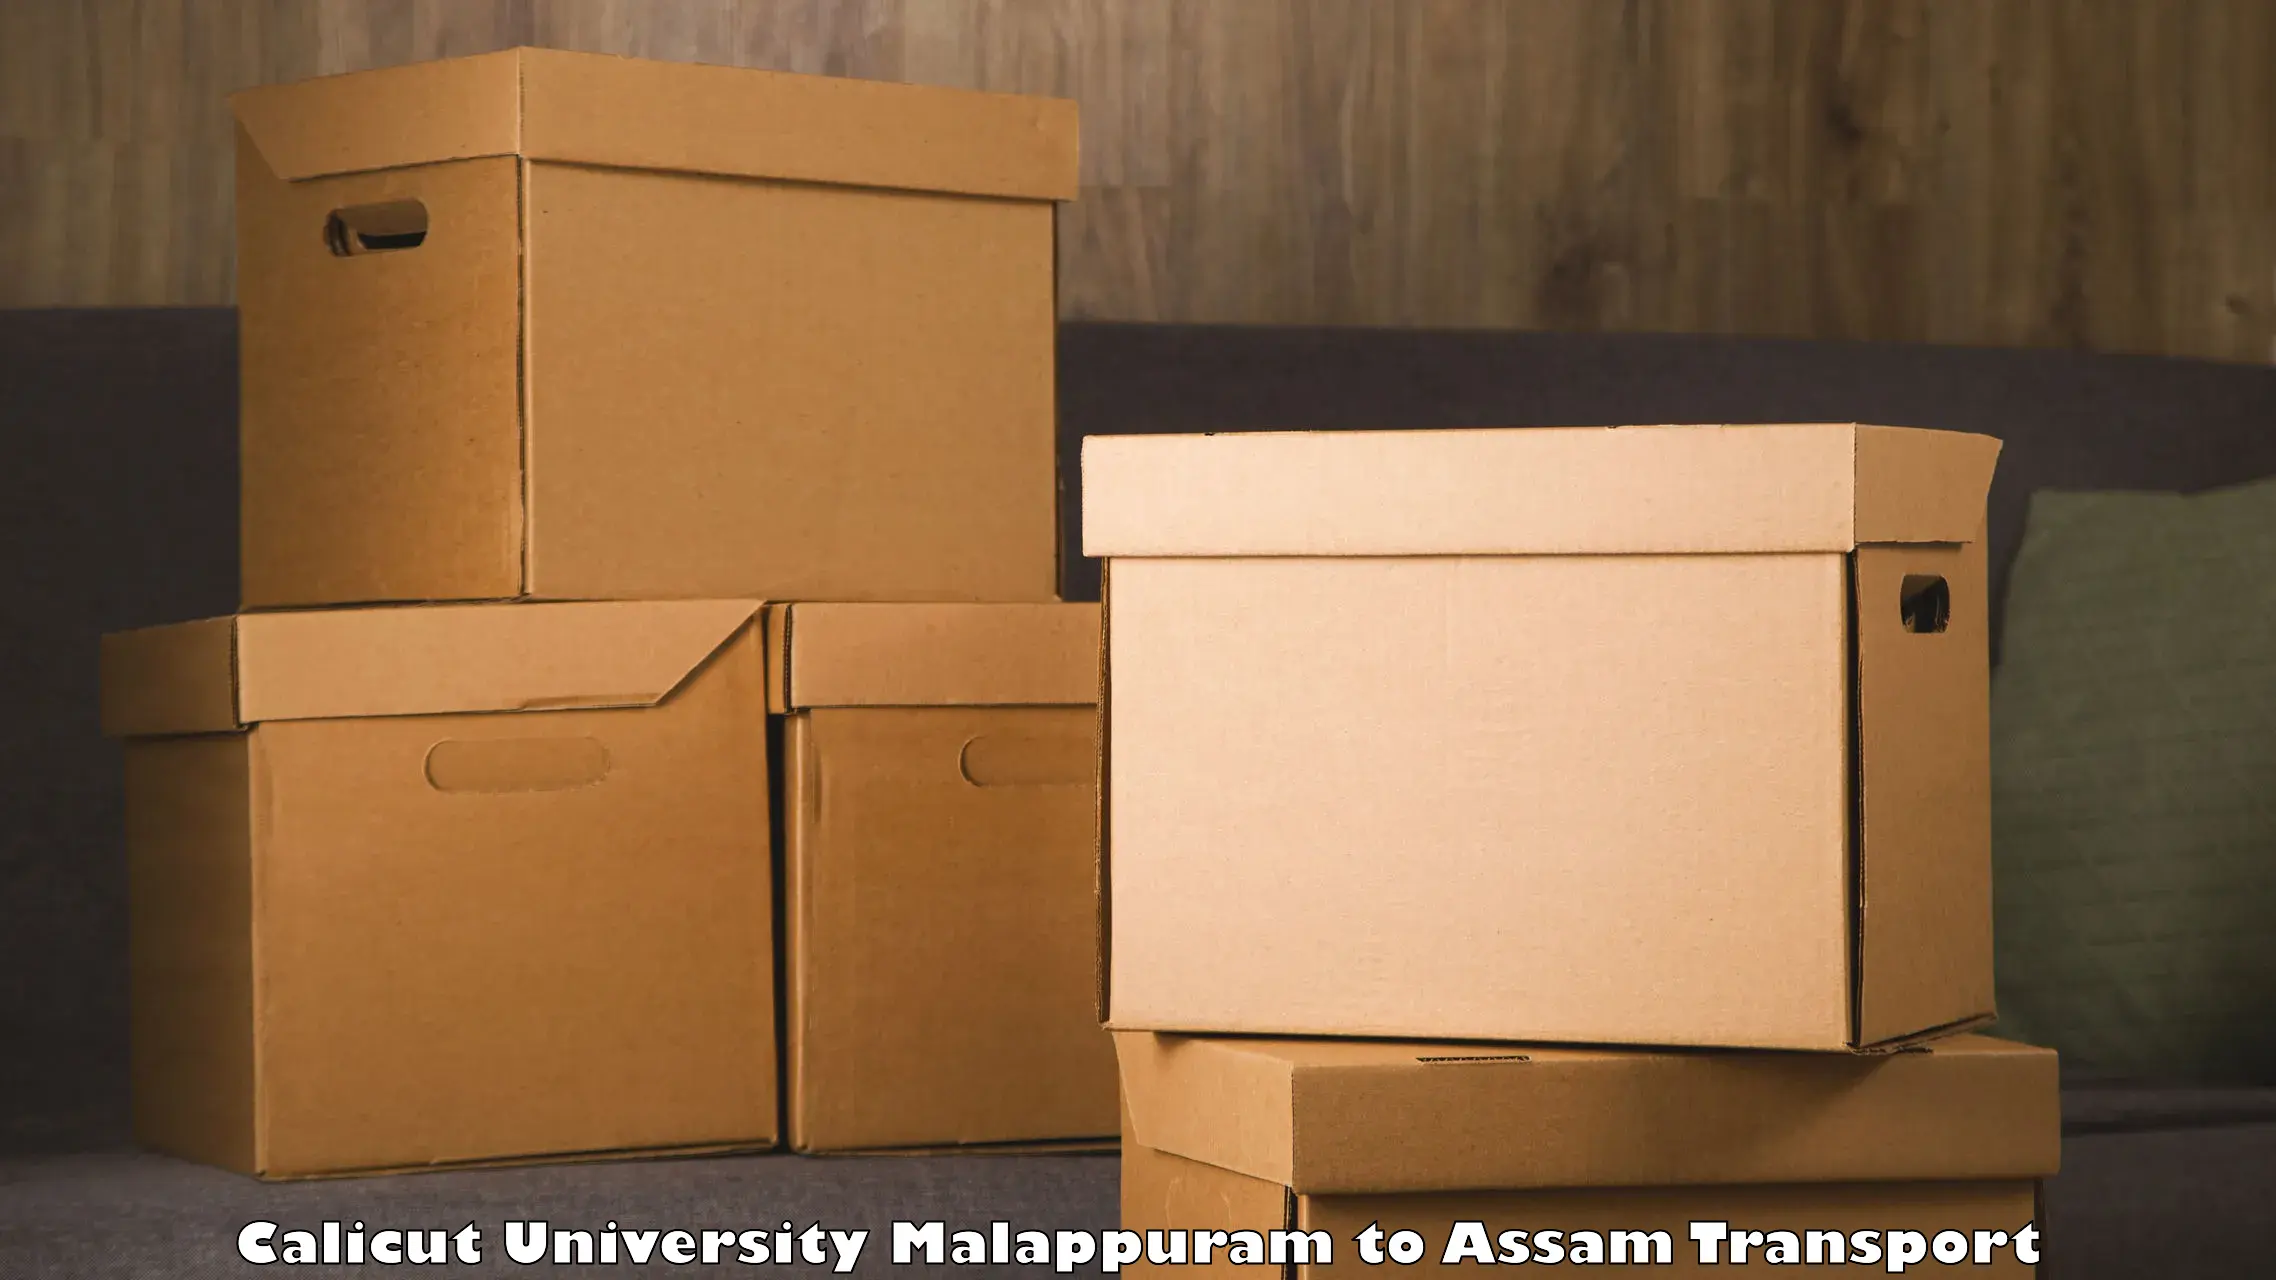 Package delivery services Calicut University Malappuram to Dibrugarh University